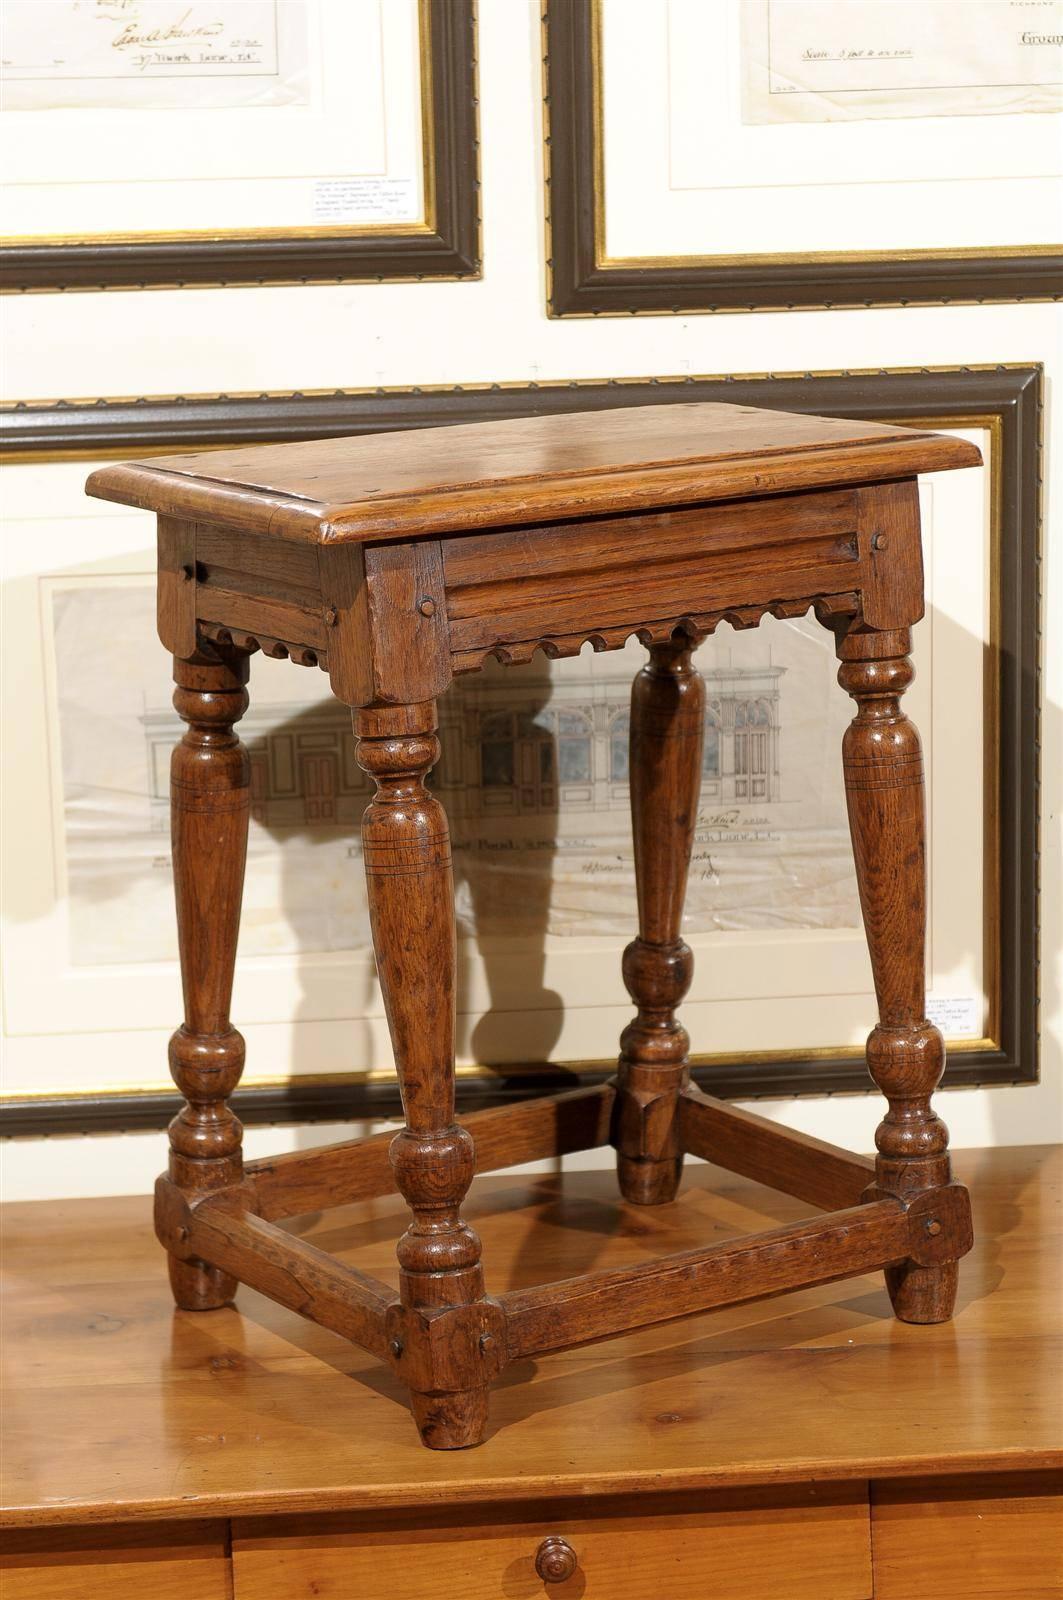 This is an English joint stool from 1890. This would be a wonderful stool or used as a drinks table.